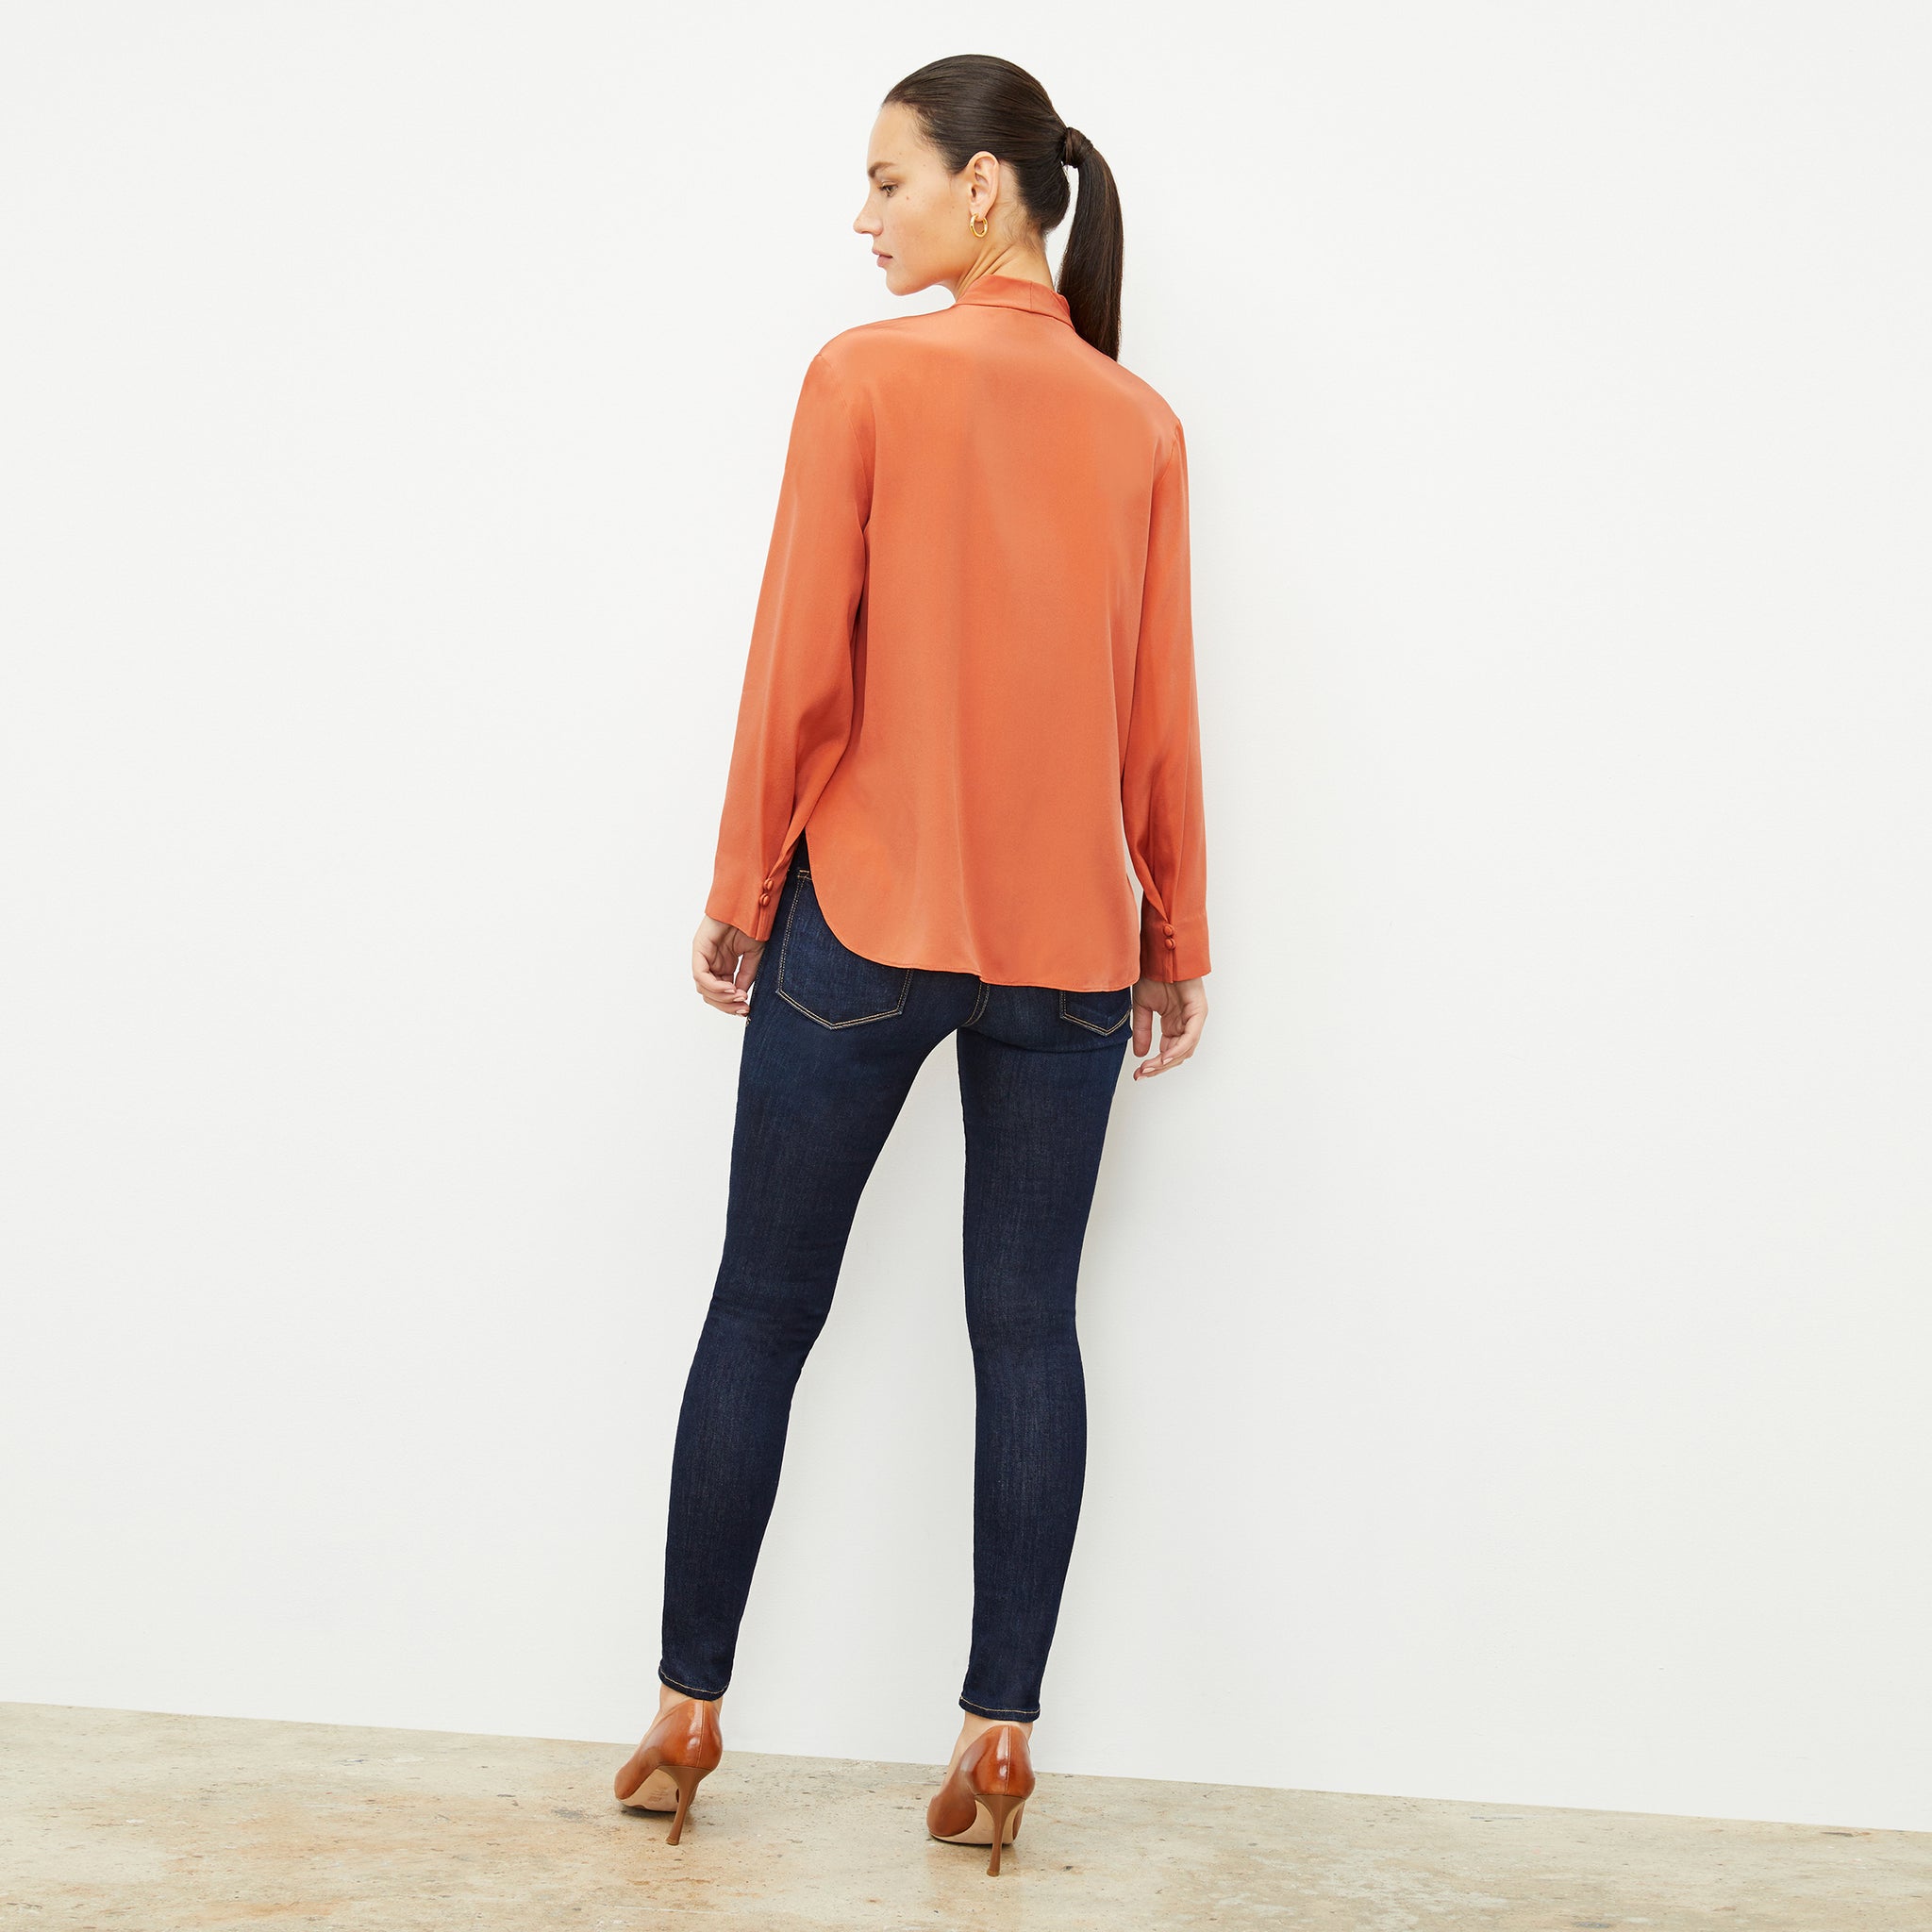 Back image of a woman wearing the Darcy Top in Guava